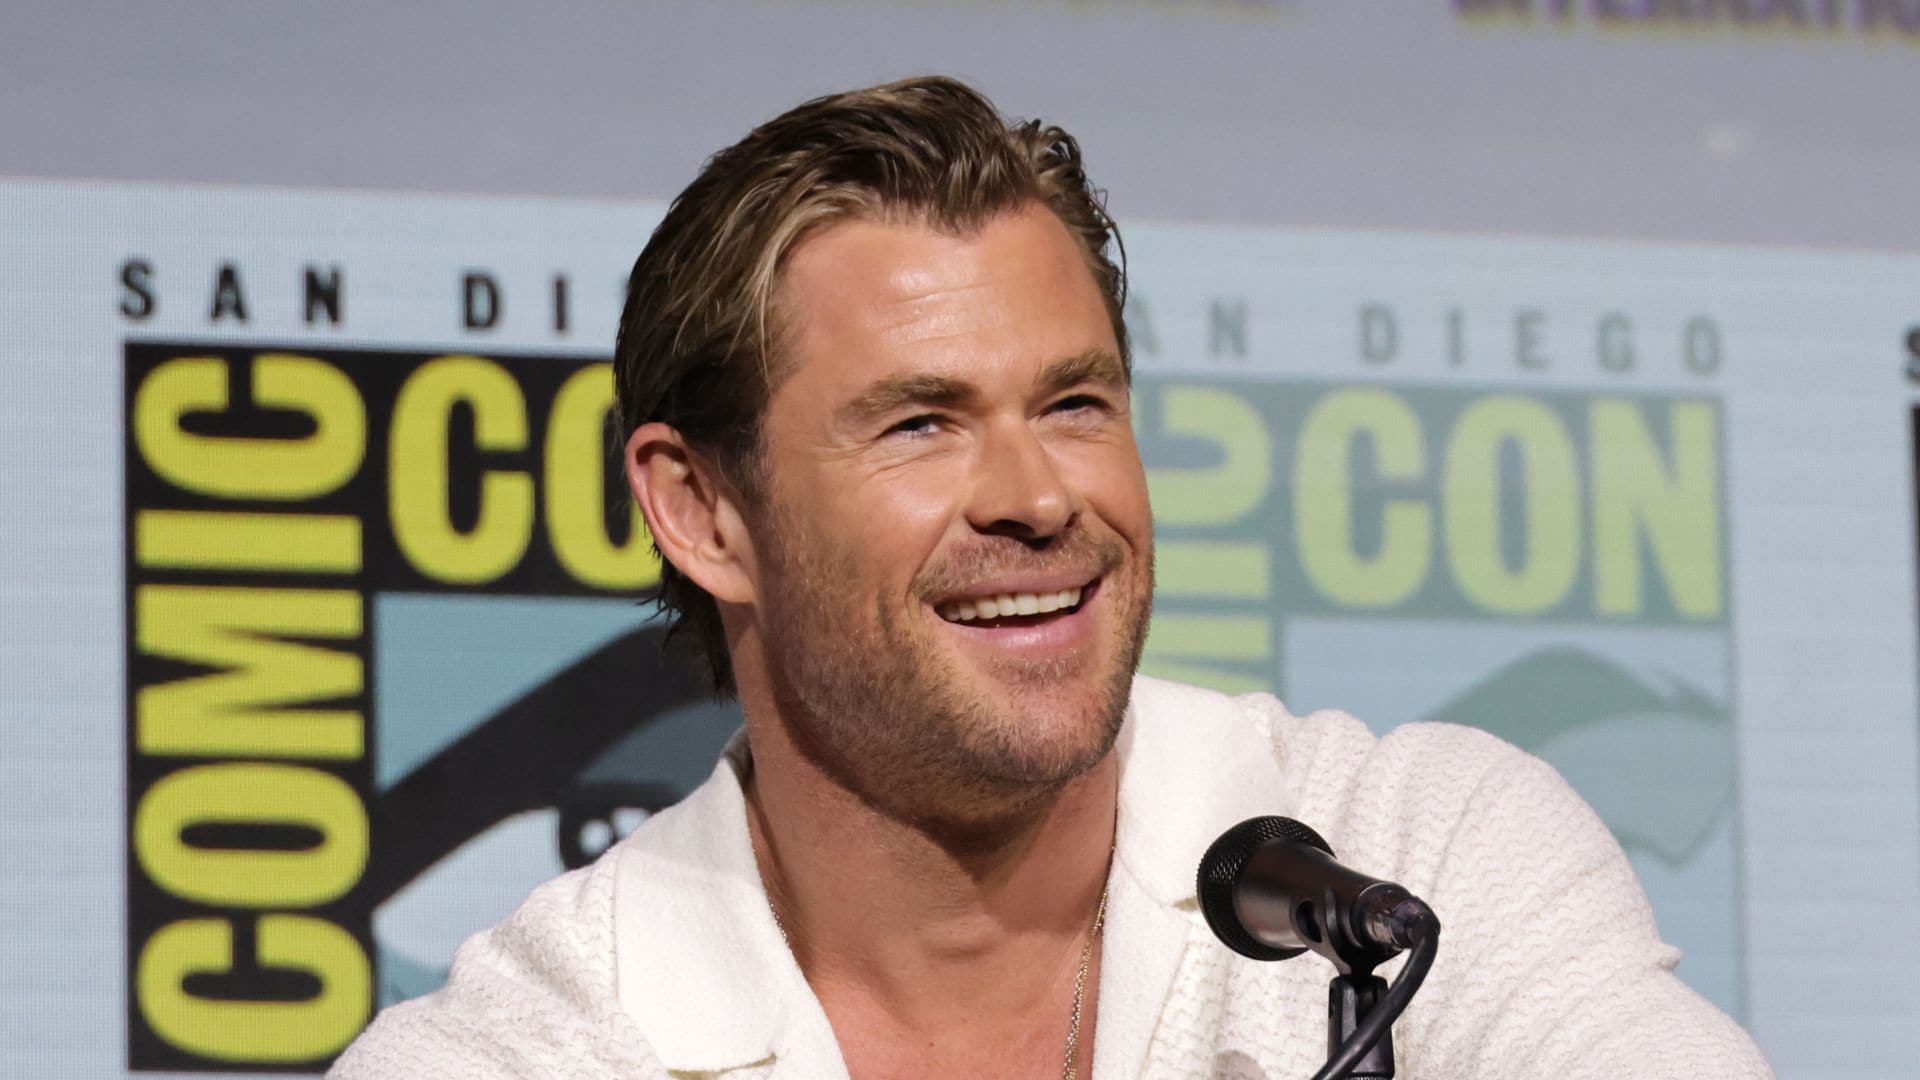 Chris Hemsworth practices his hairstylist skills on his son